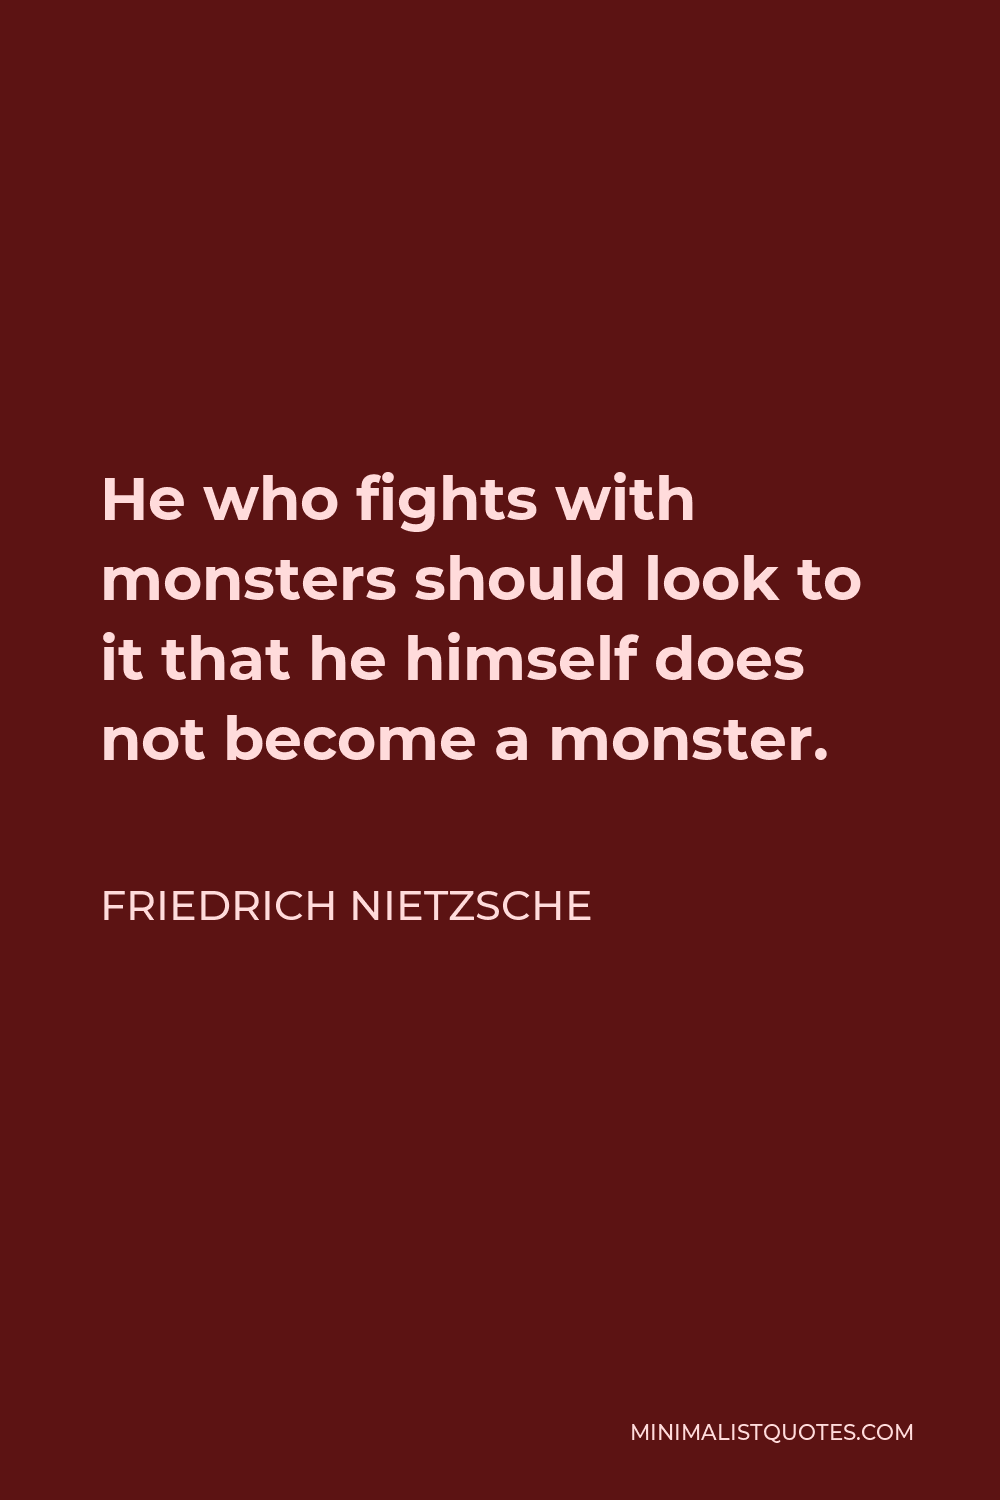 Friedrich Nietzsche Quote - He who fights with monsters should look to it that he himself does not become a monster.